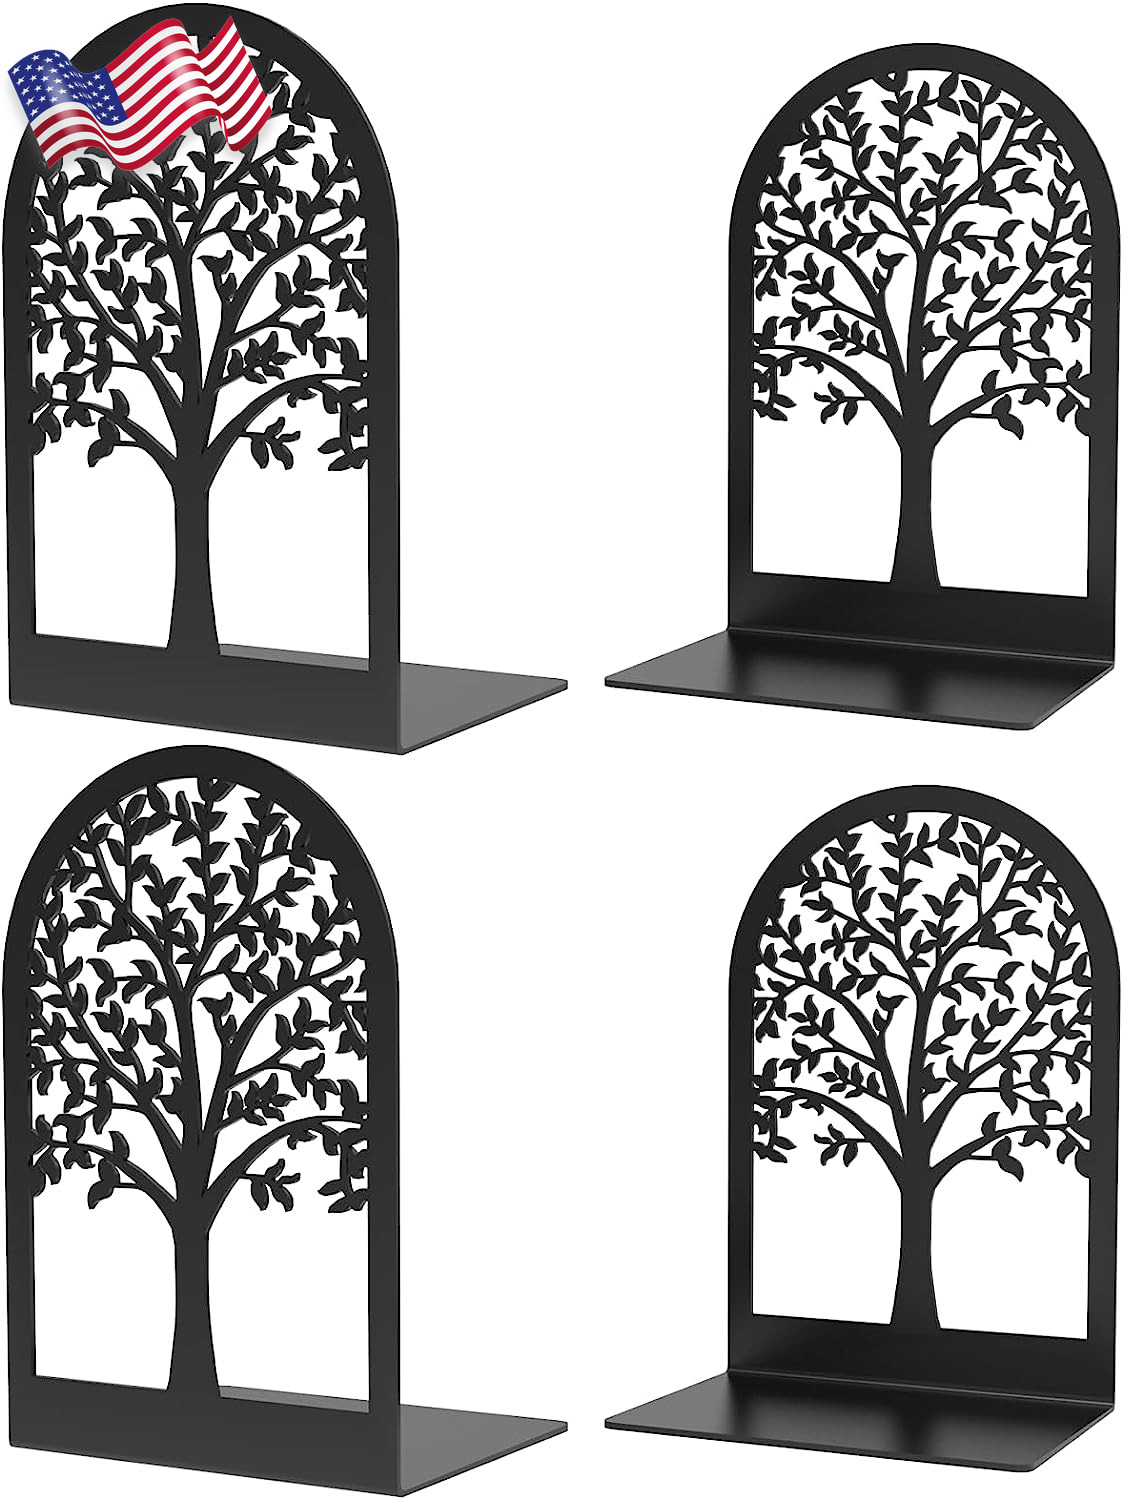 Tree Ends Shelves Heavy Duty Bookend Book Holder Home Office Large 4 Pcs NEW